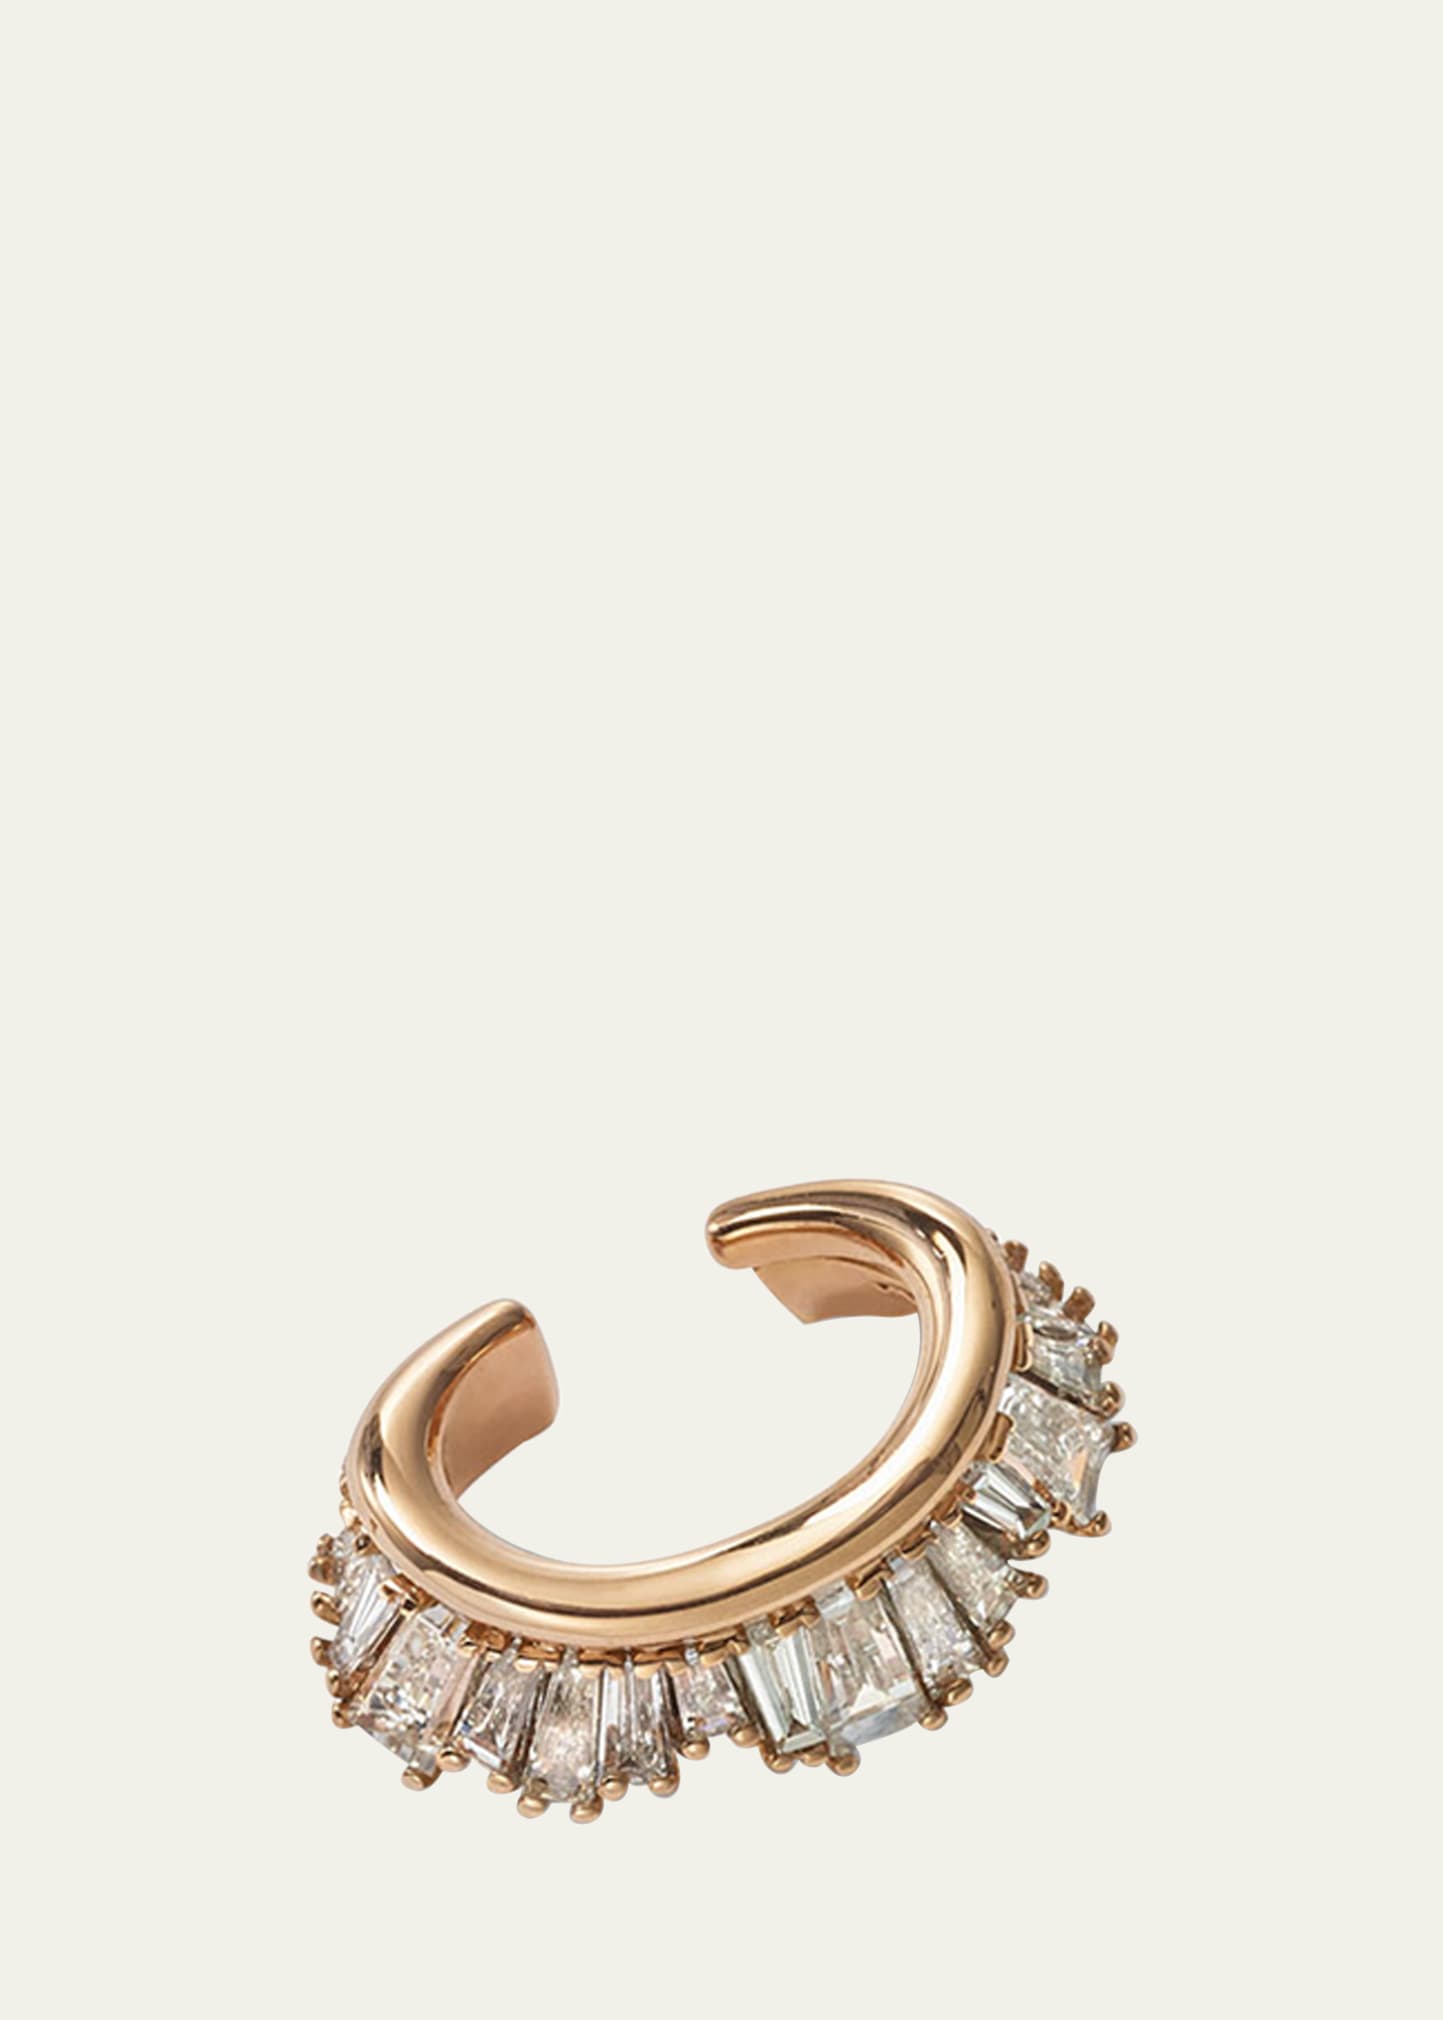 Nak Armstrong 20k Recycled Rose Gold Ruched Ear Cuff With Diamonds, Single In Rg